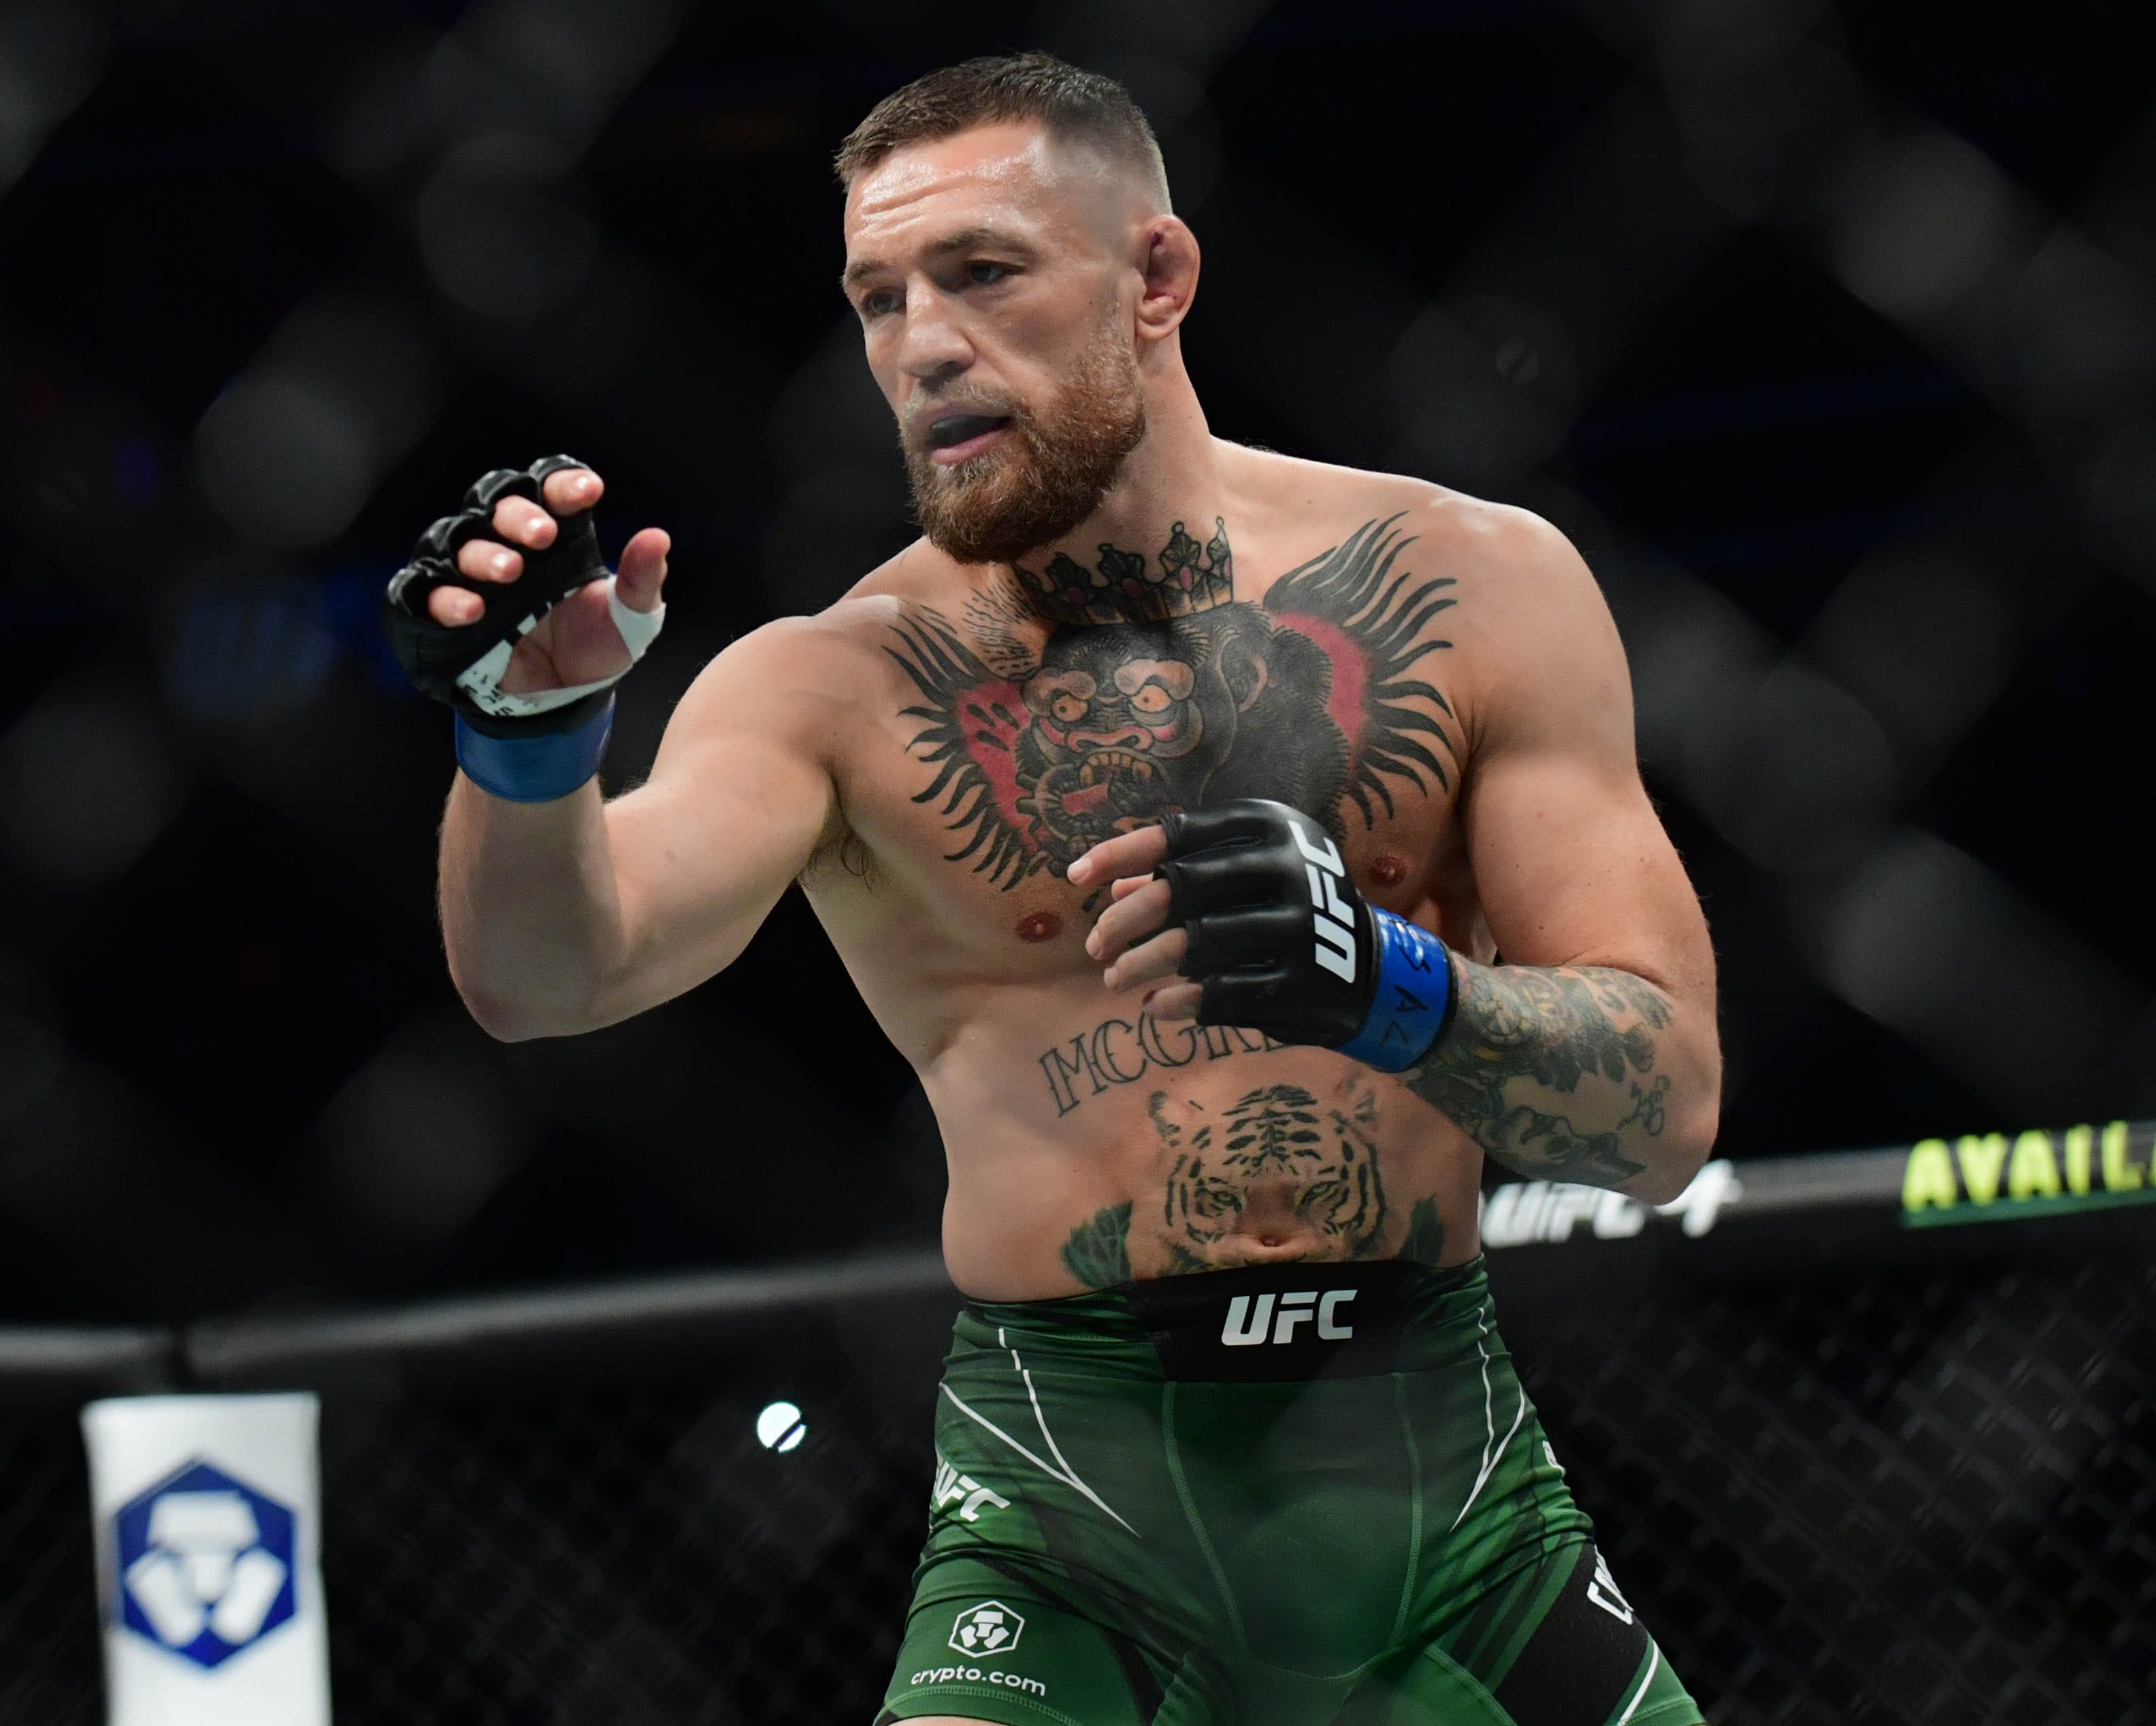 conor mcgregor will fight michael chandler in ufc 303. here are the opening odds